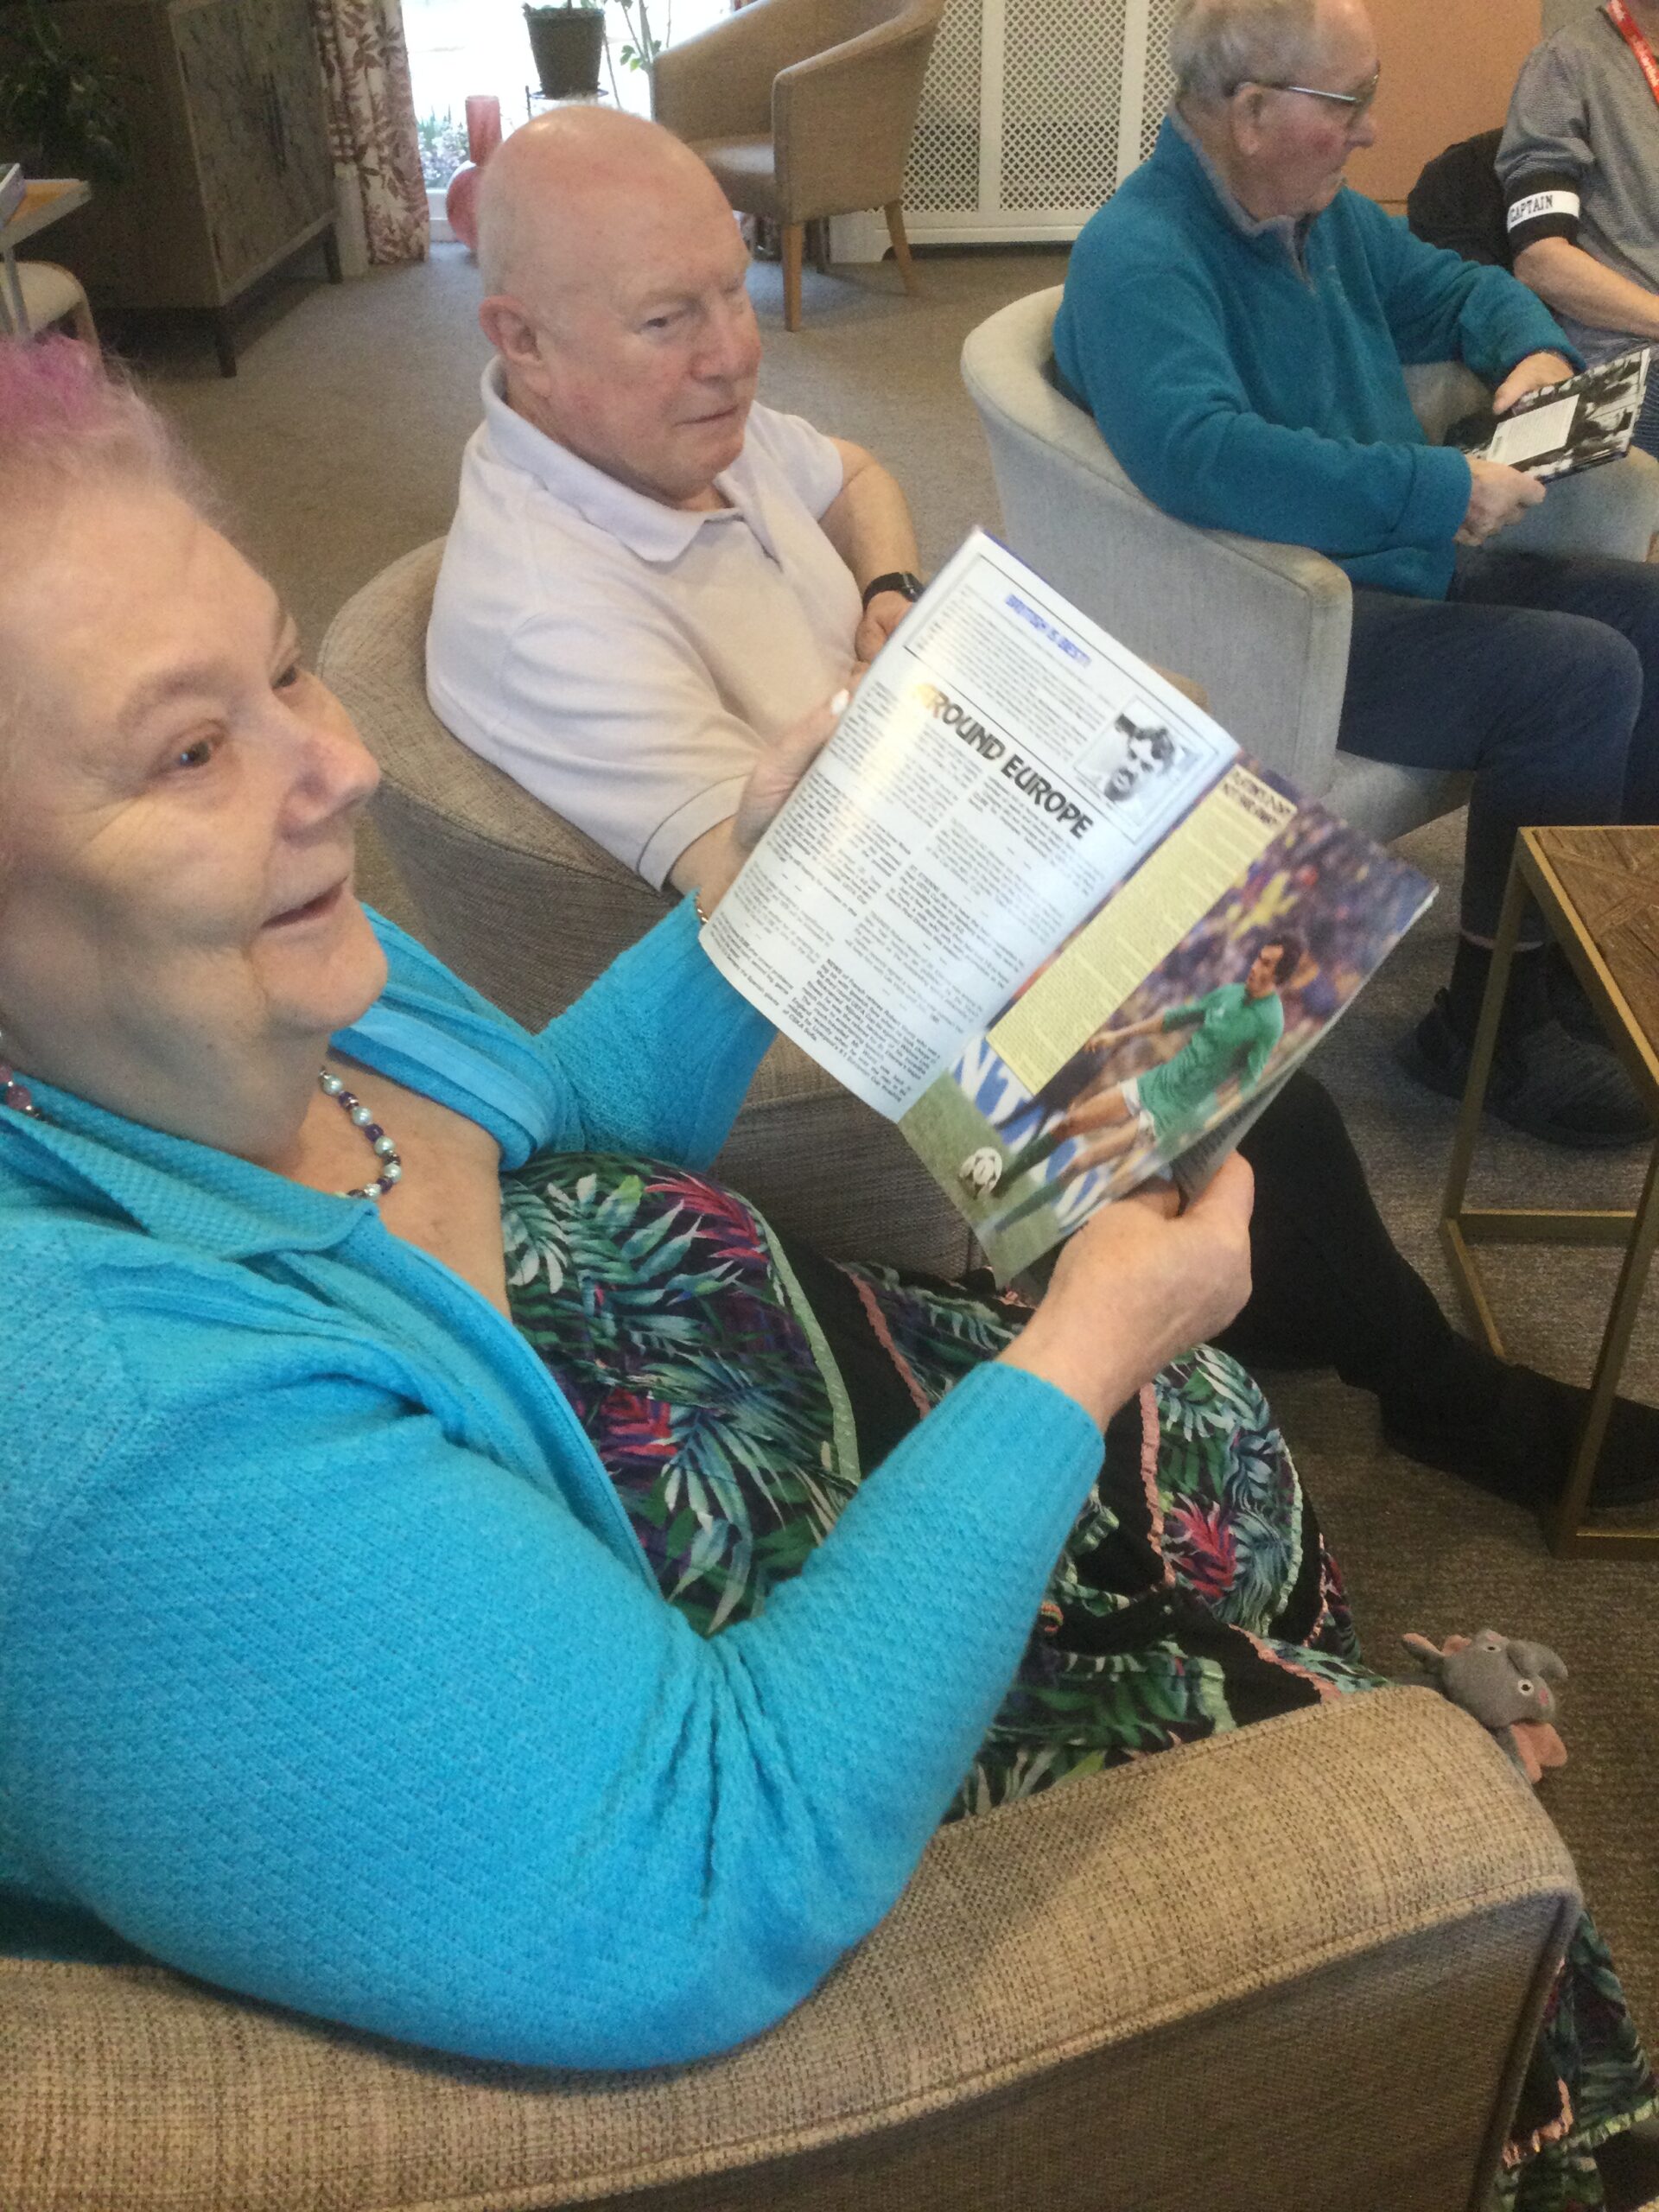 Woman seated in armchair, holding footballing programme open with text and photo of player. Two men seated in armchairs to her left